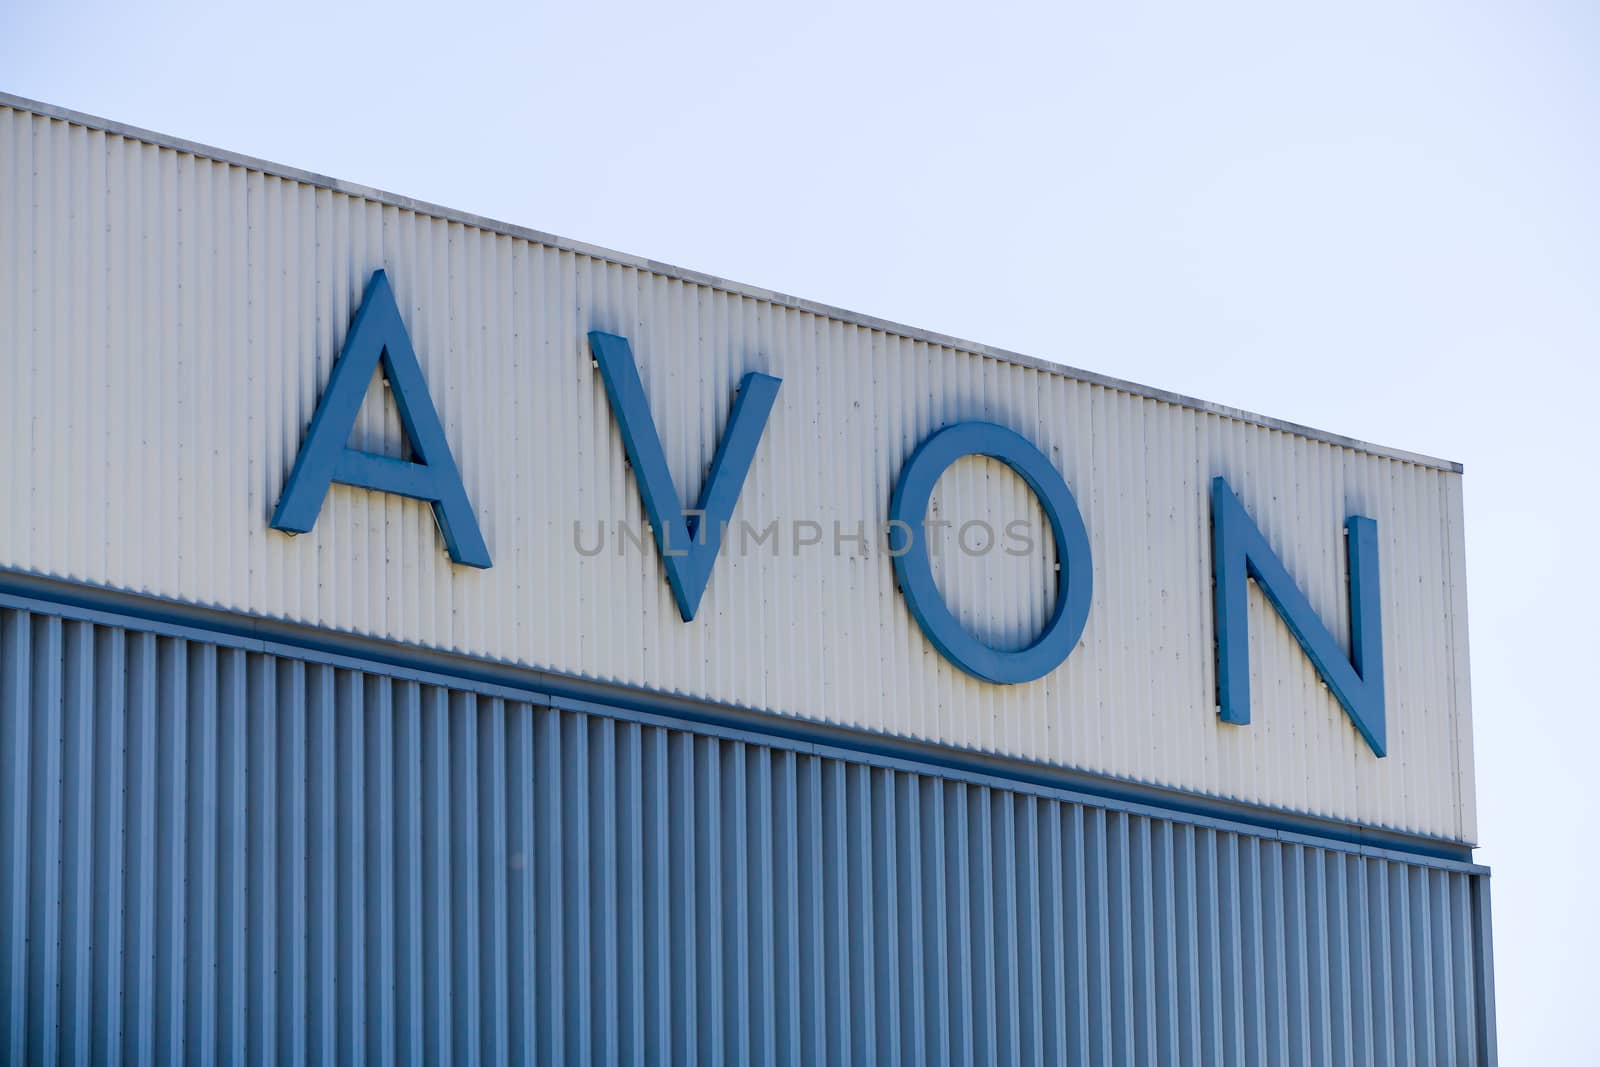 PASADENA, CA/USA - APRIL 16, 2016: Avon Corporation distribution center and logo. Avon Products, Inc, is an American international manufacturer and direct selling company in beauty products.